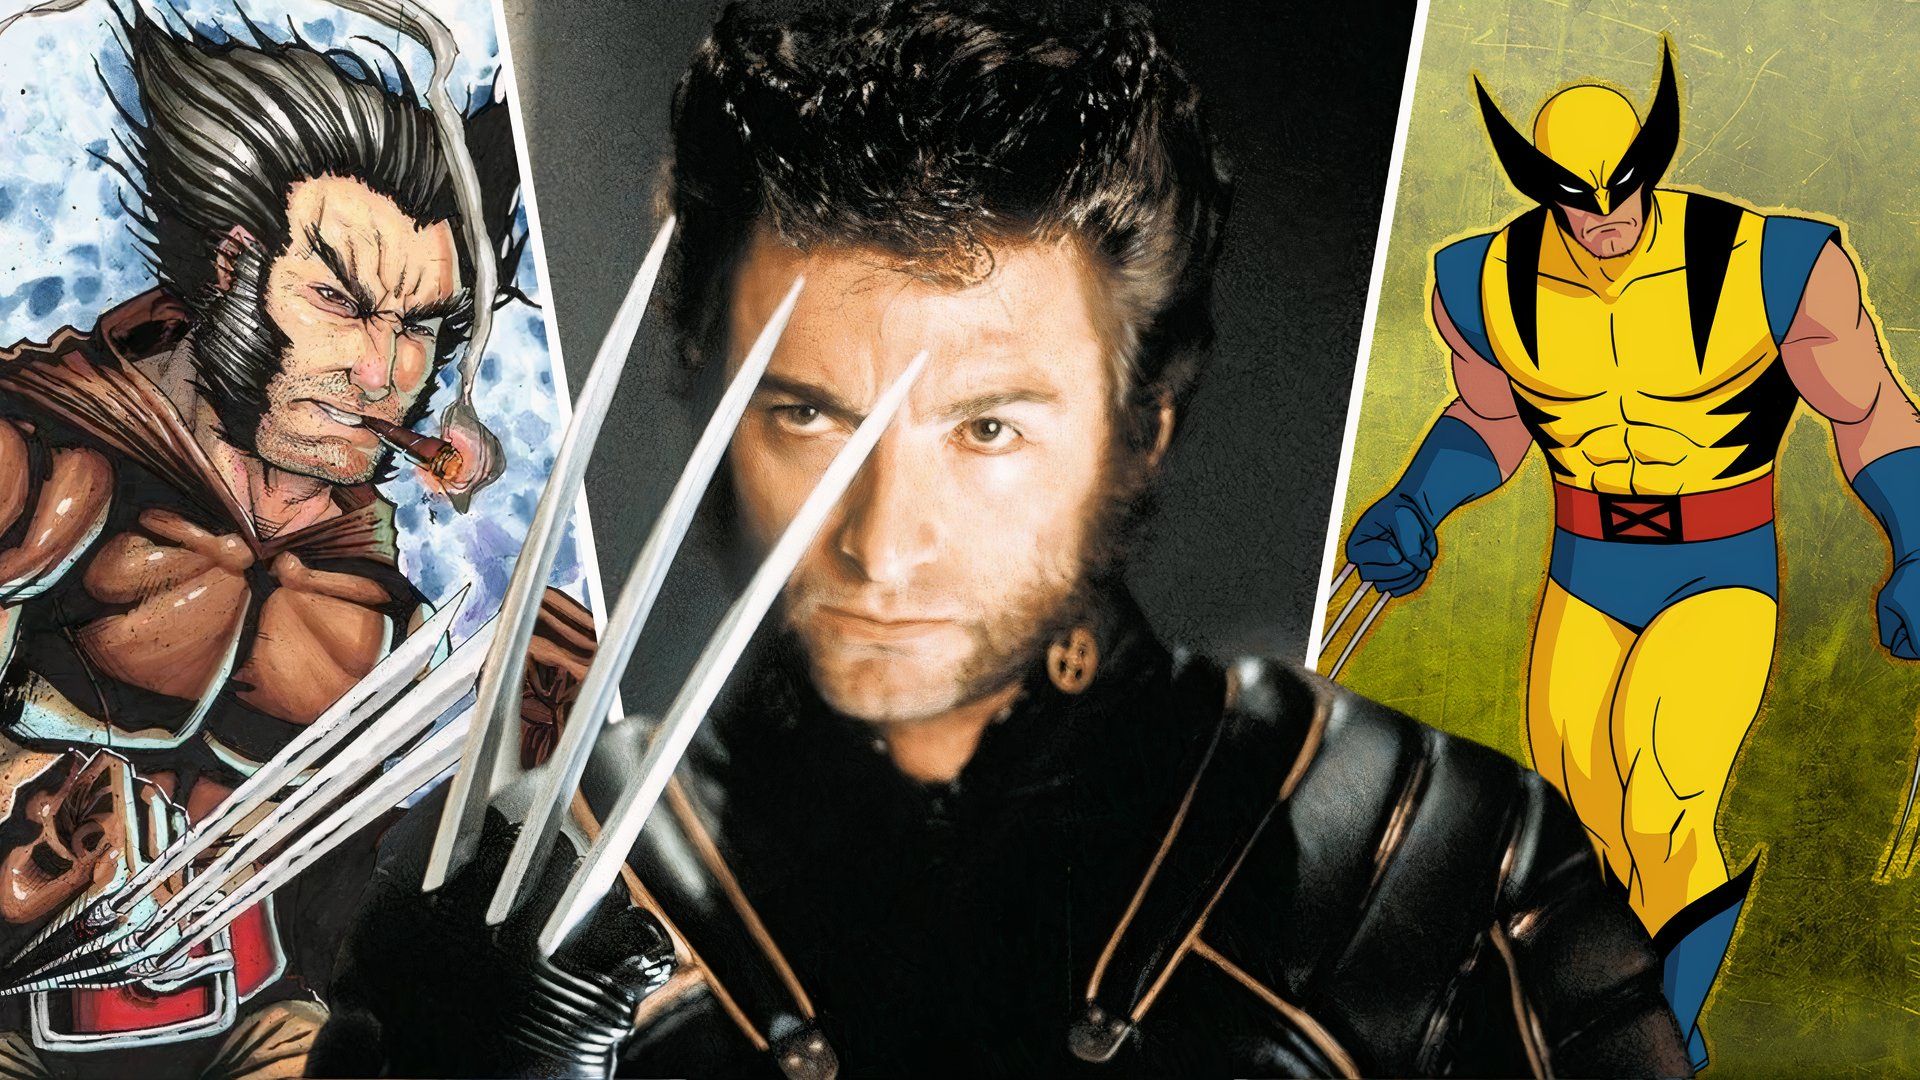 An edited image of Hugh Jackman as Wolverine alongside the comic version of Wolverine and the version from X-Men '97